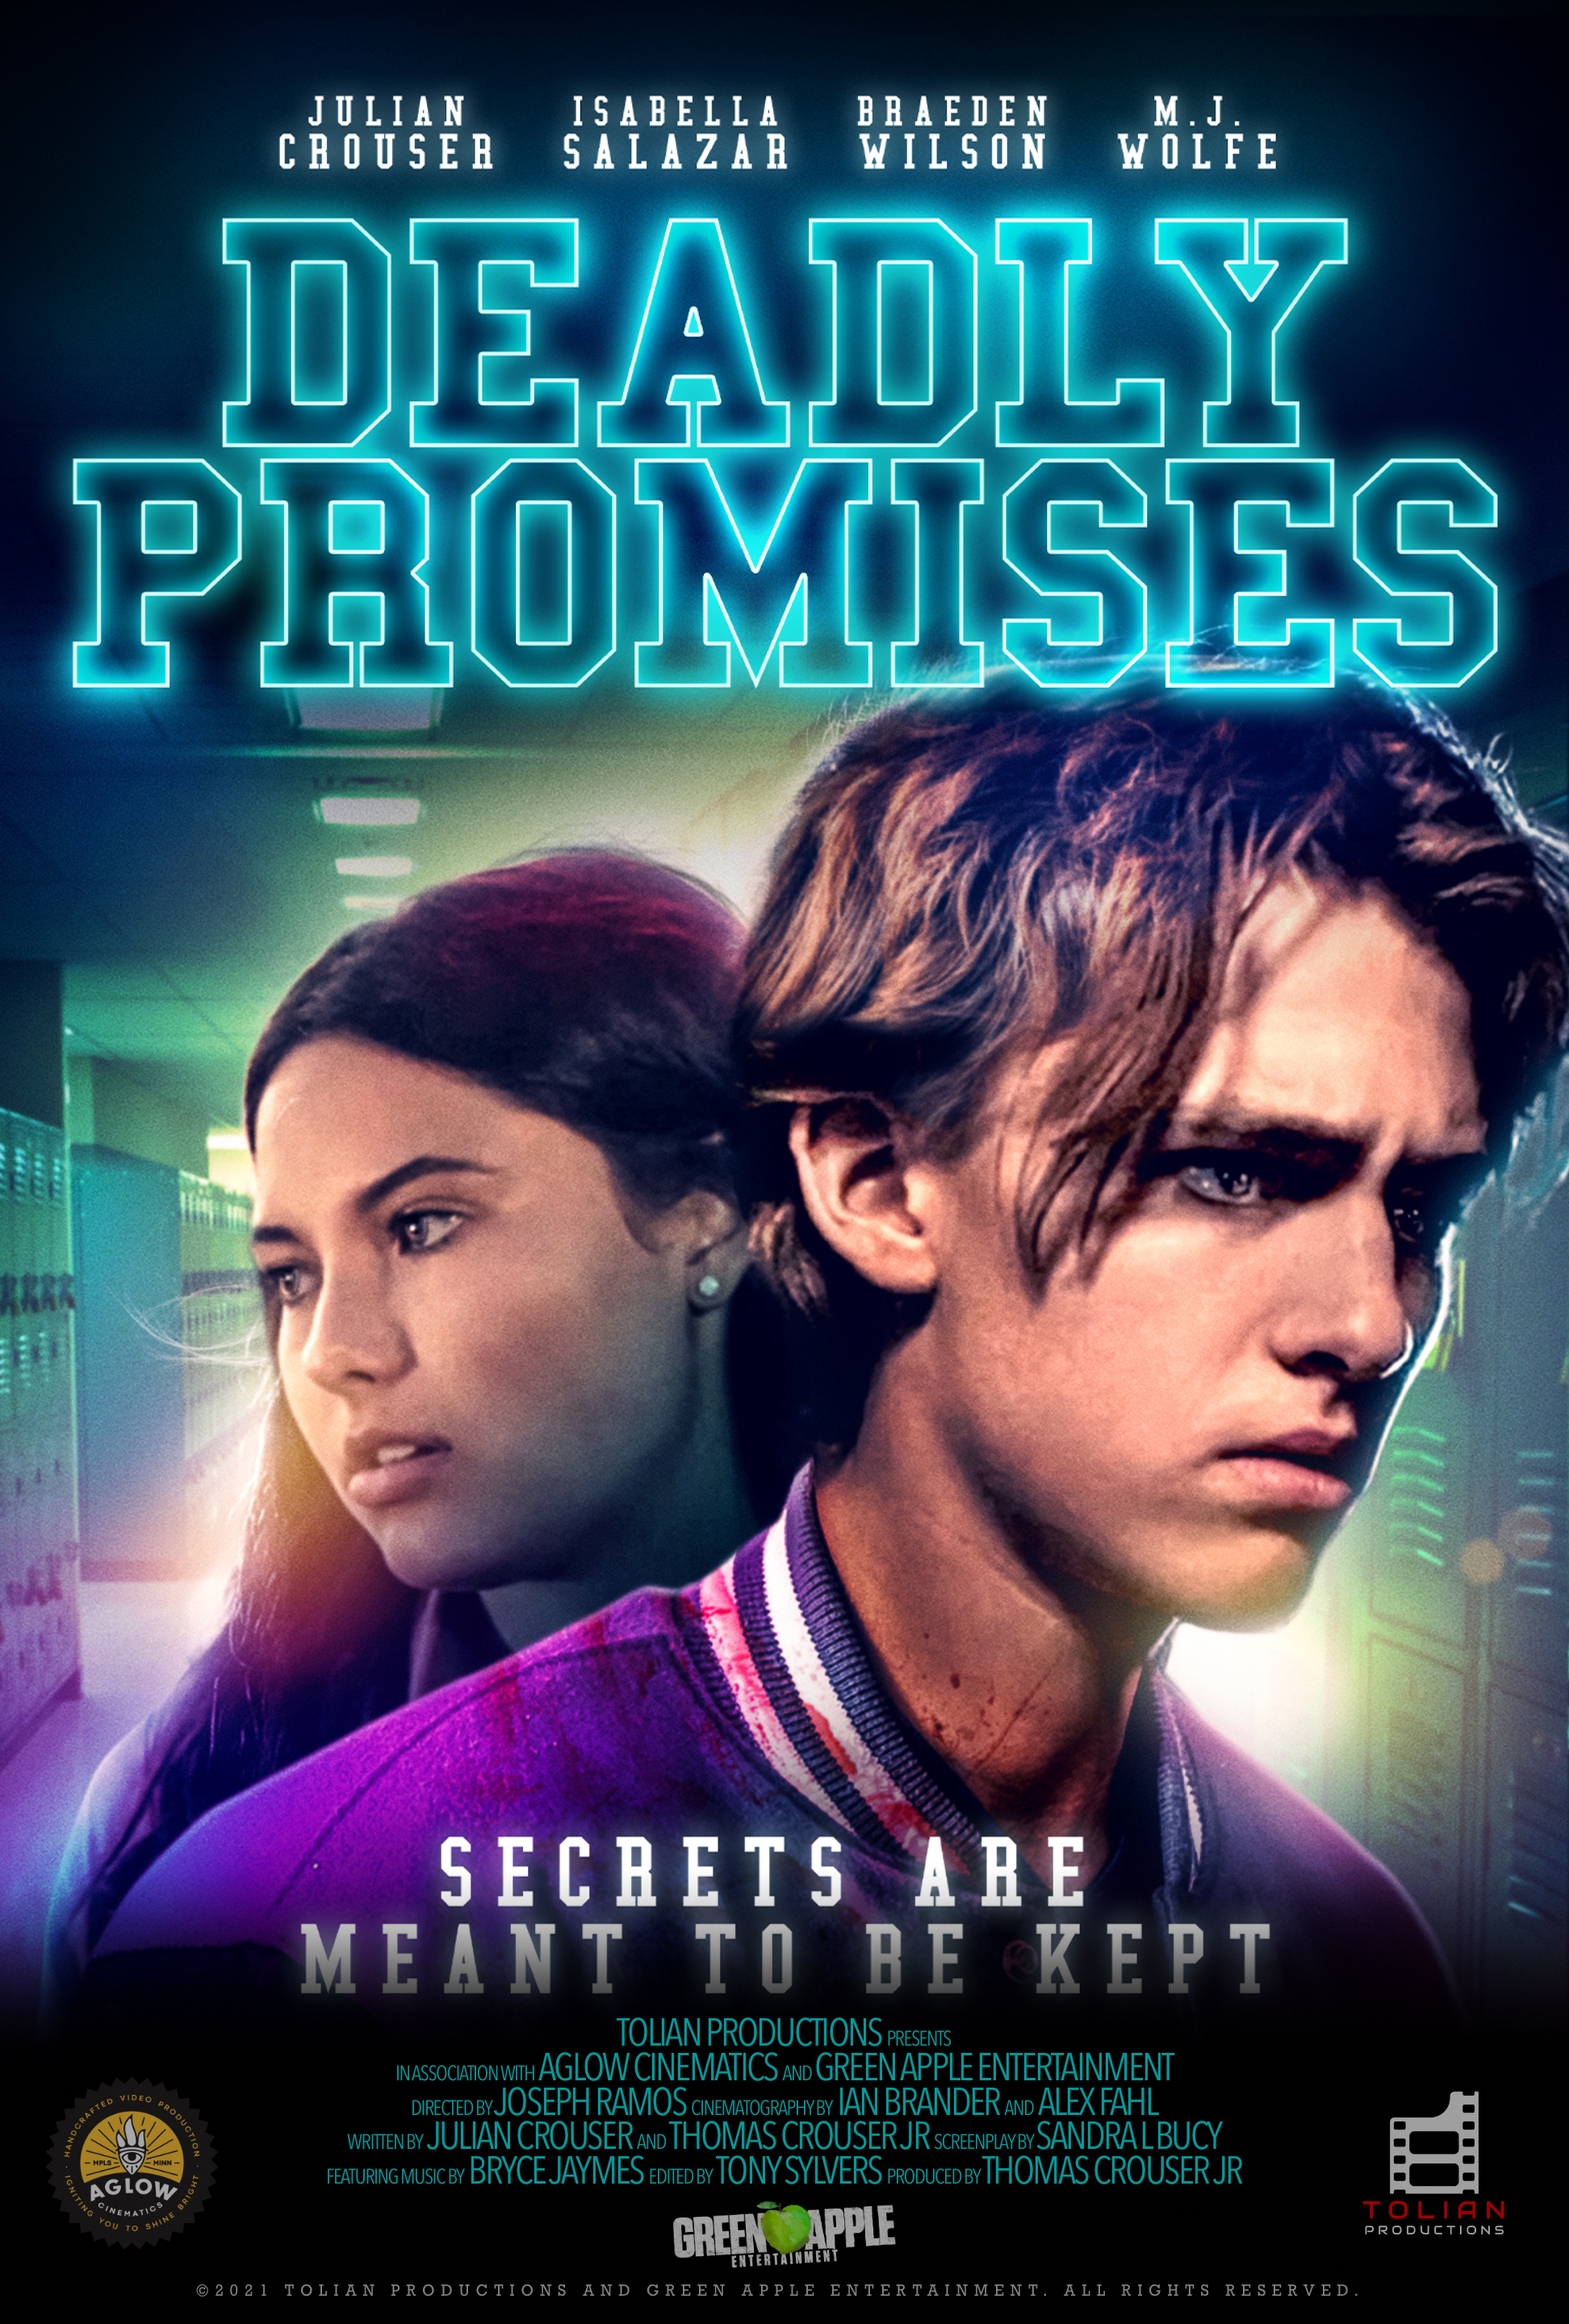 Deadly Promises (2020)